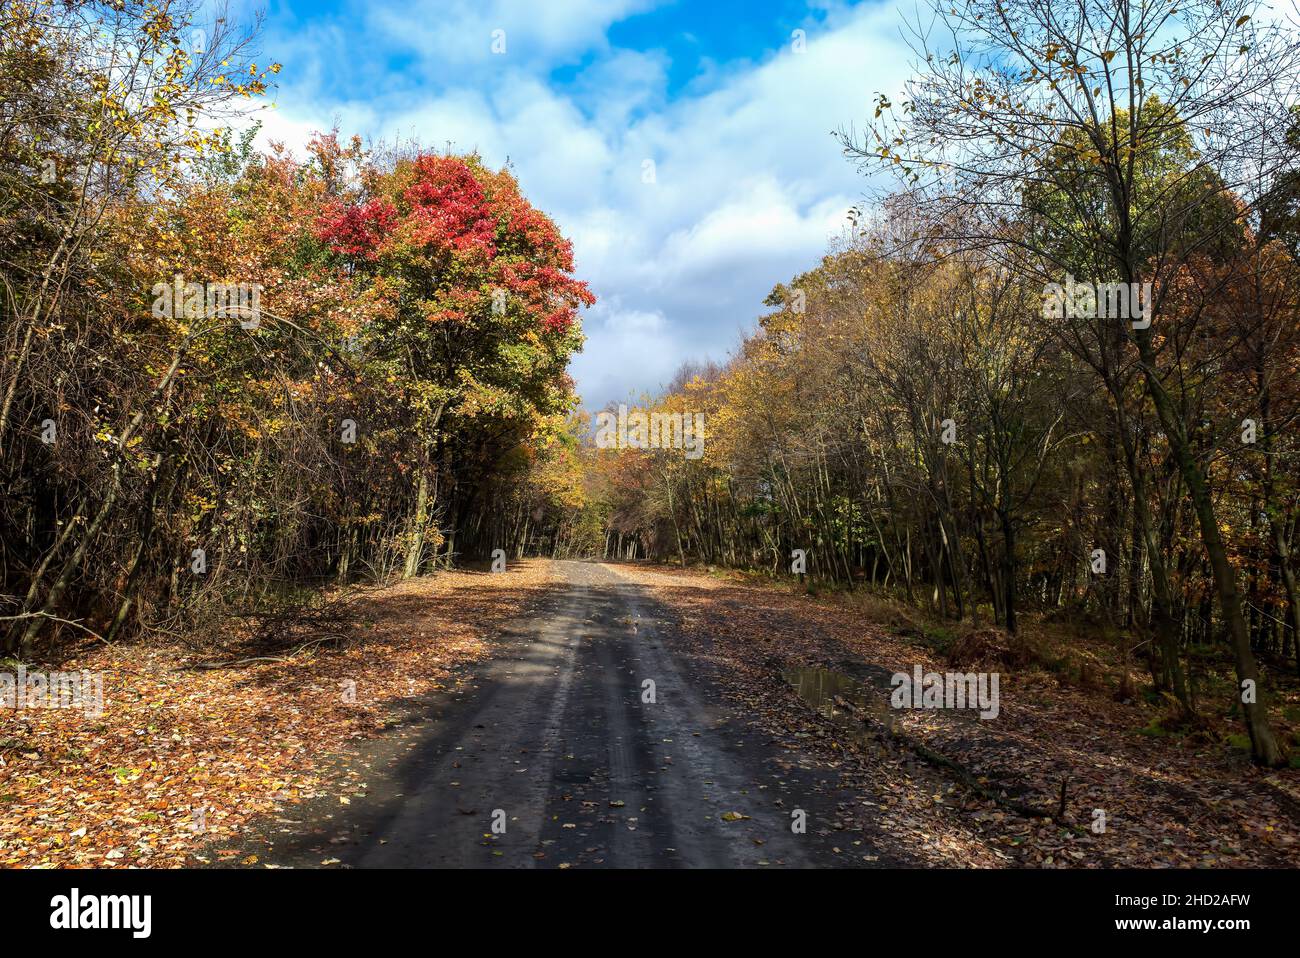 Isolated mountain road in an eastern PA USA hardwood forest in the dappled autumn sunlight. Stock Photo